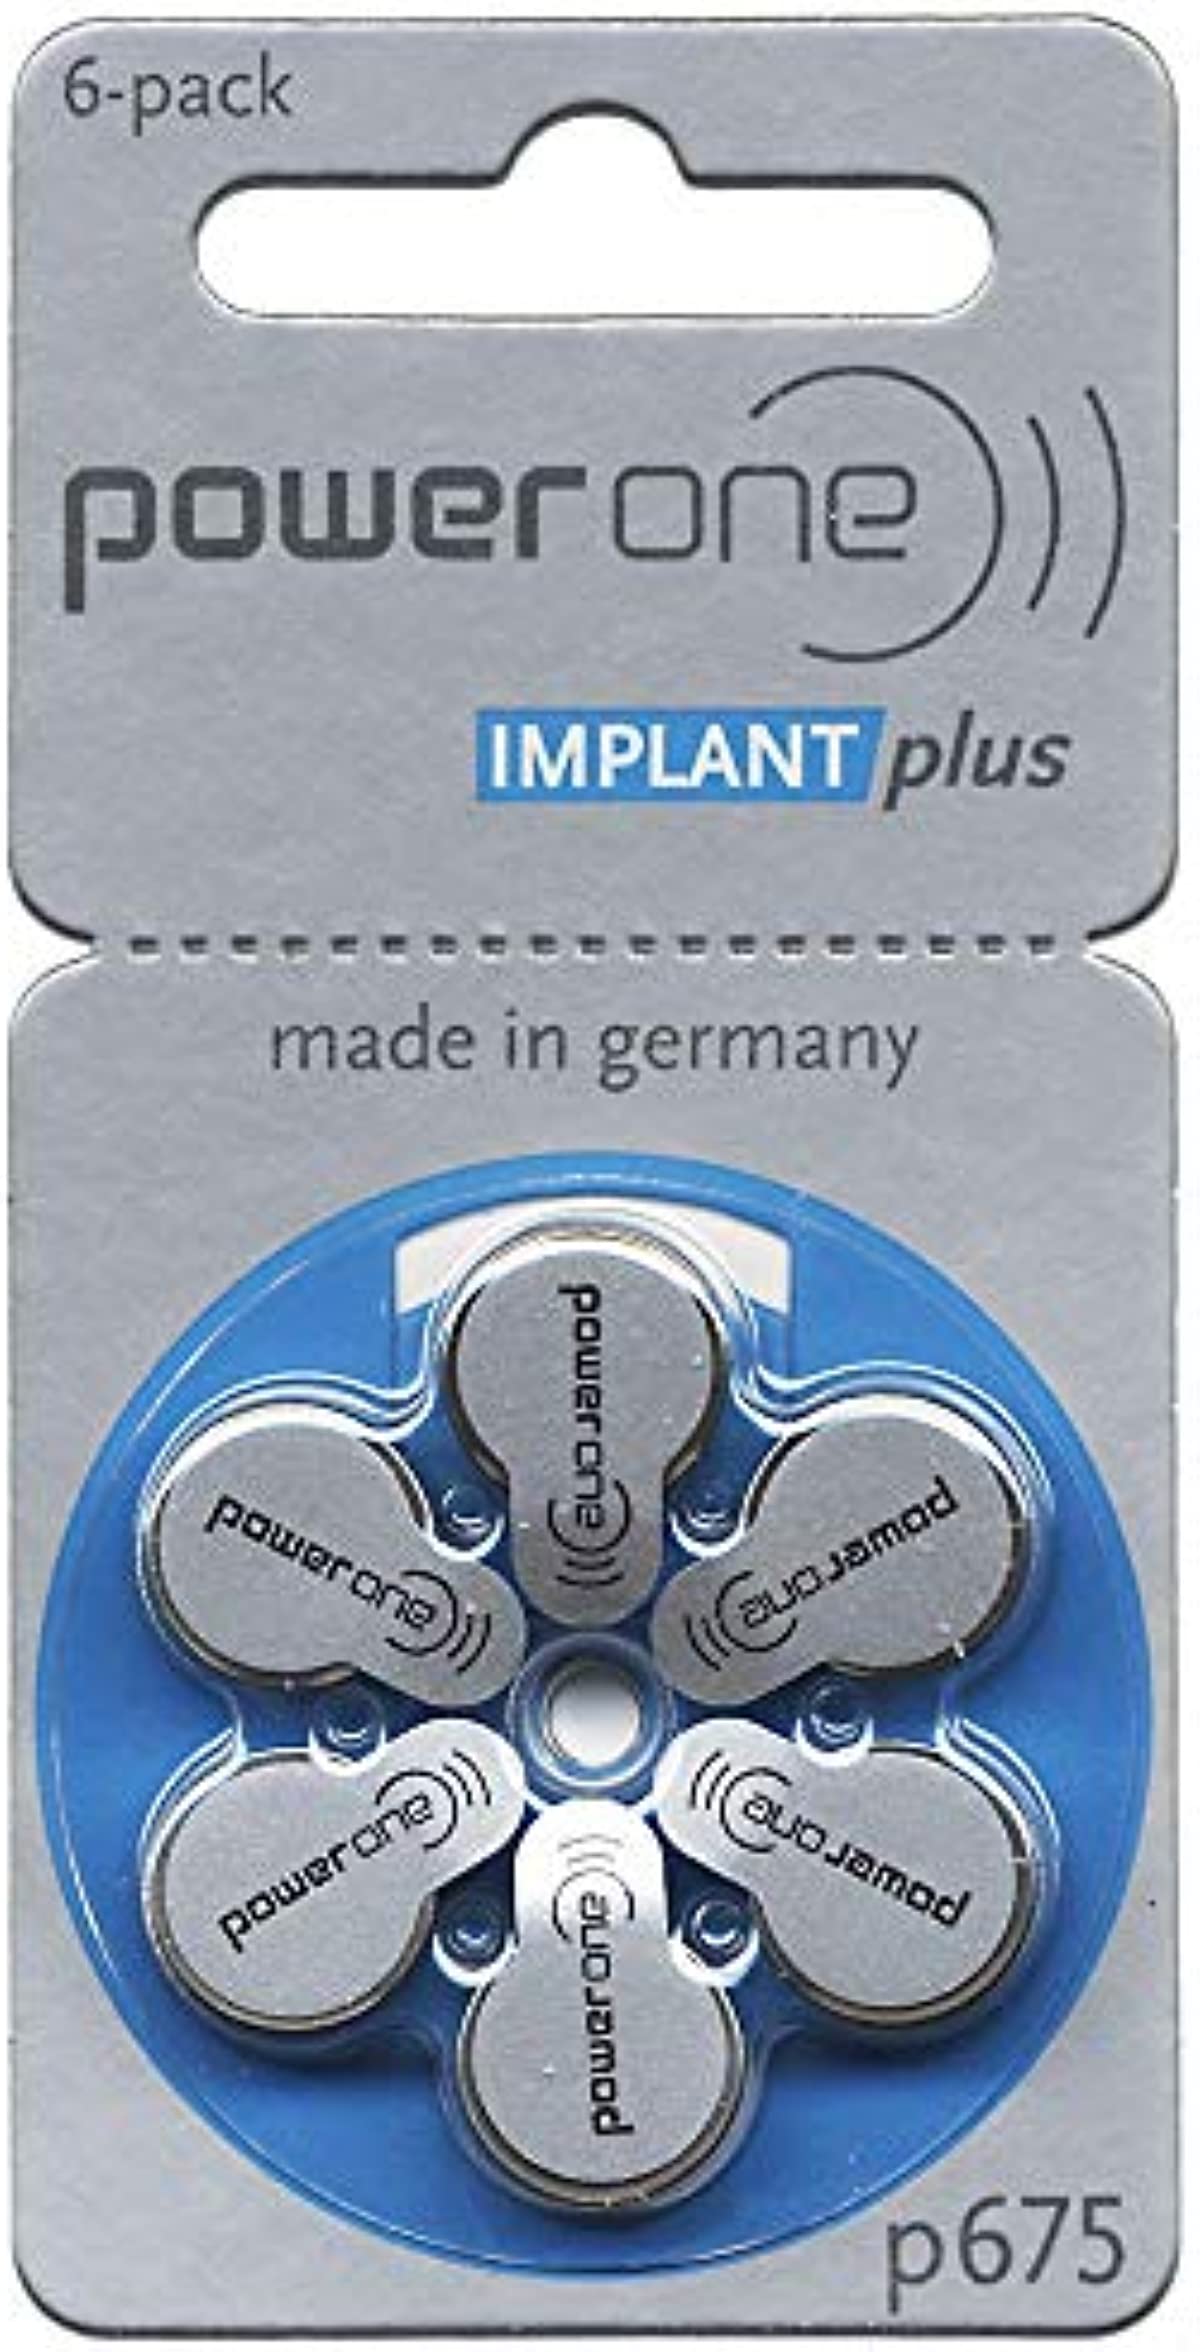 120 x Size p675 PowerOne IMPLANT Plus Cochlear Hearing Aid Batteries